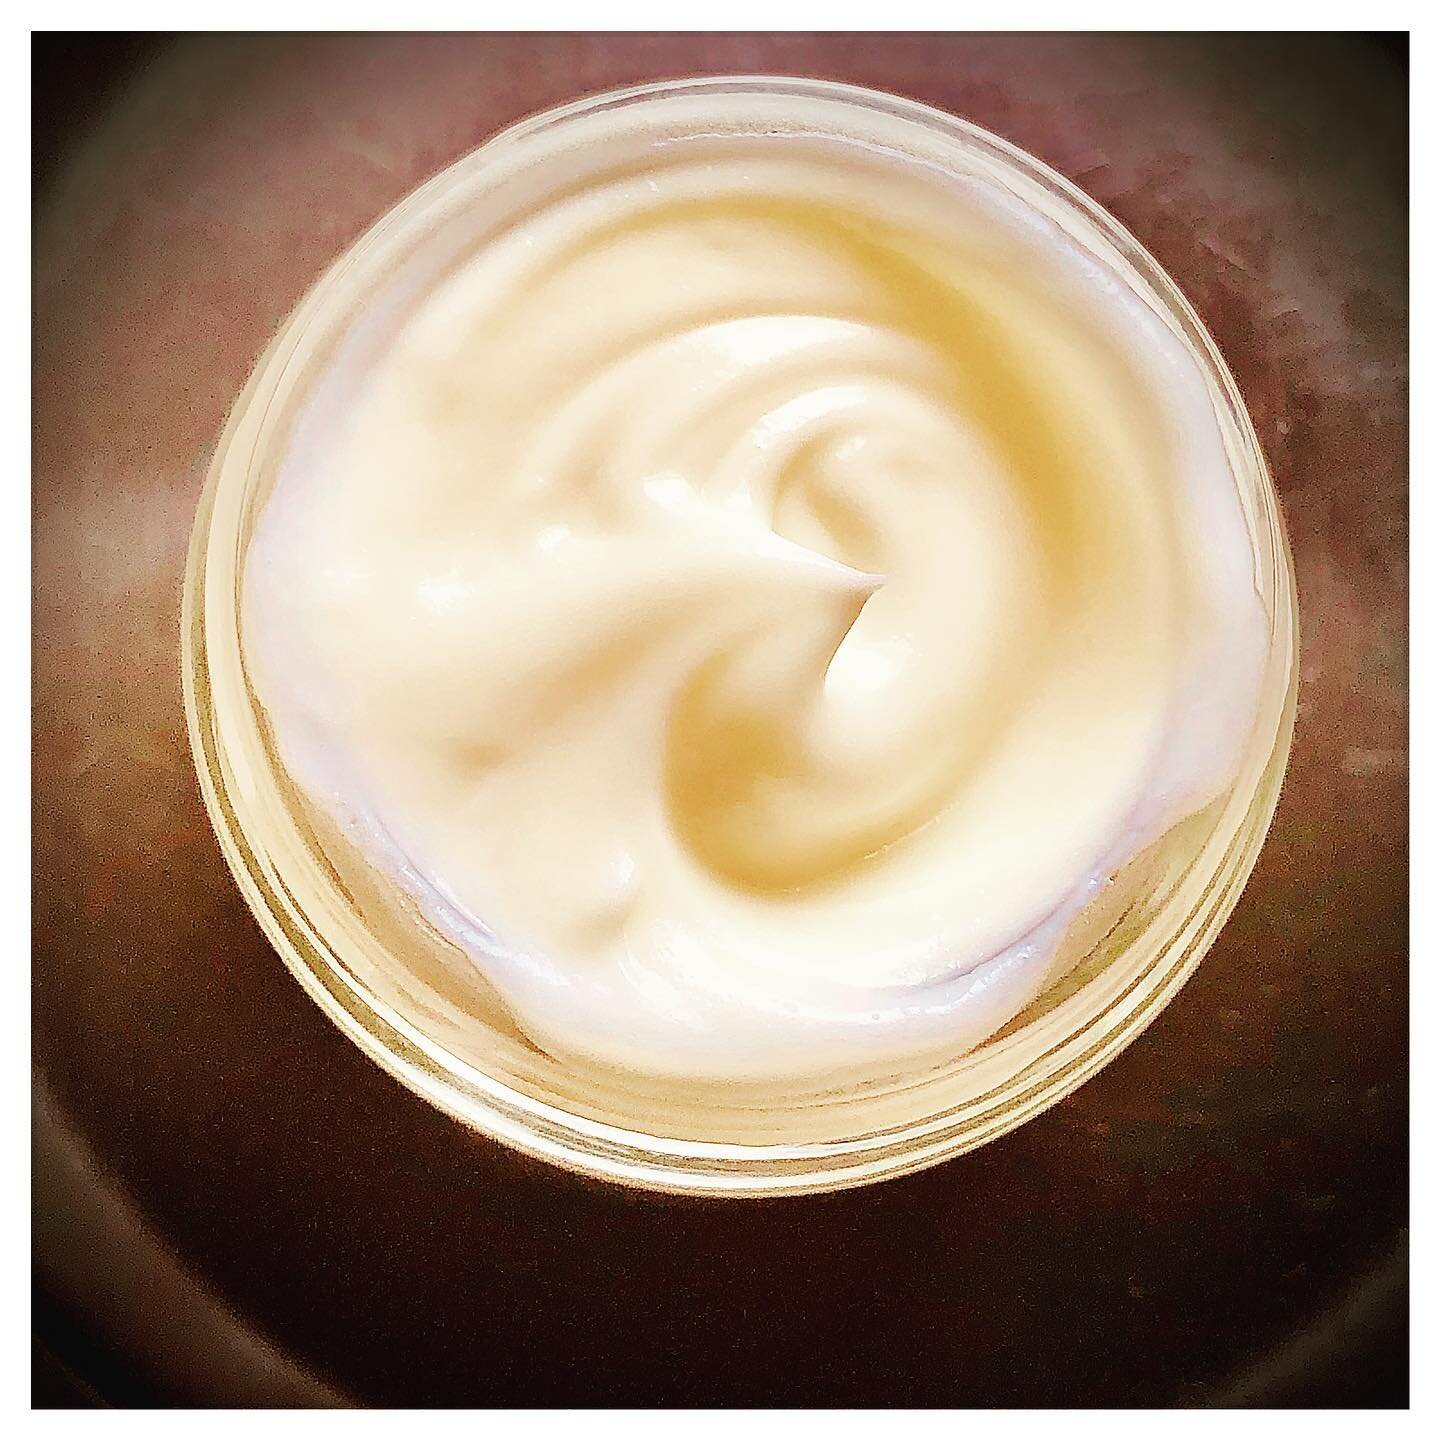 Skin soothing cream incorporating oat oil and a therapeutic blend of essential oils 

#essentialoils #essentialoilblends #essentialoilrecipes #aromatherapy #aromatherapyproducts #wellnessmarketing #beautyspa #skincareformulator #skincareformulation #